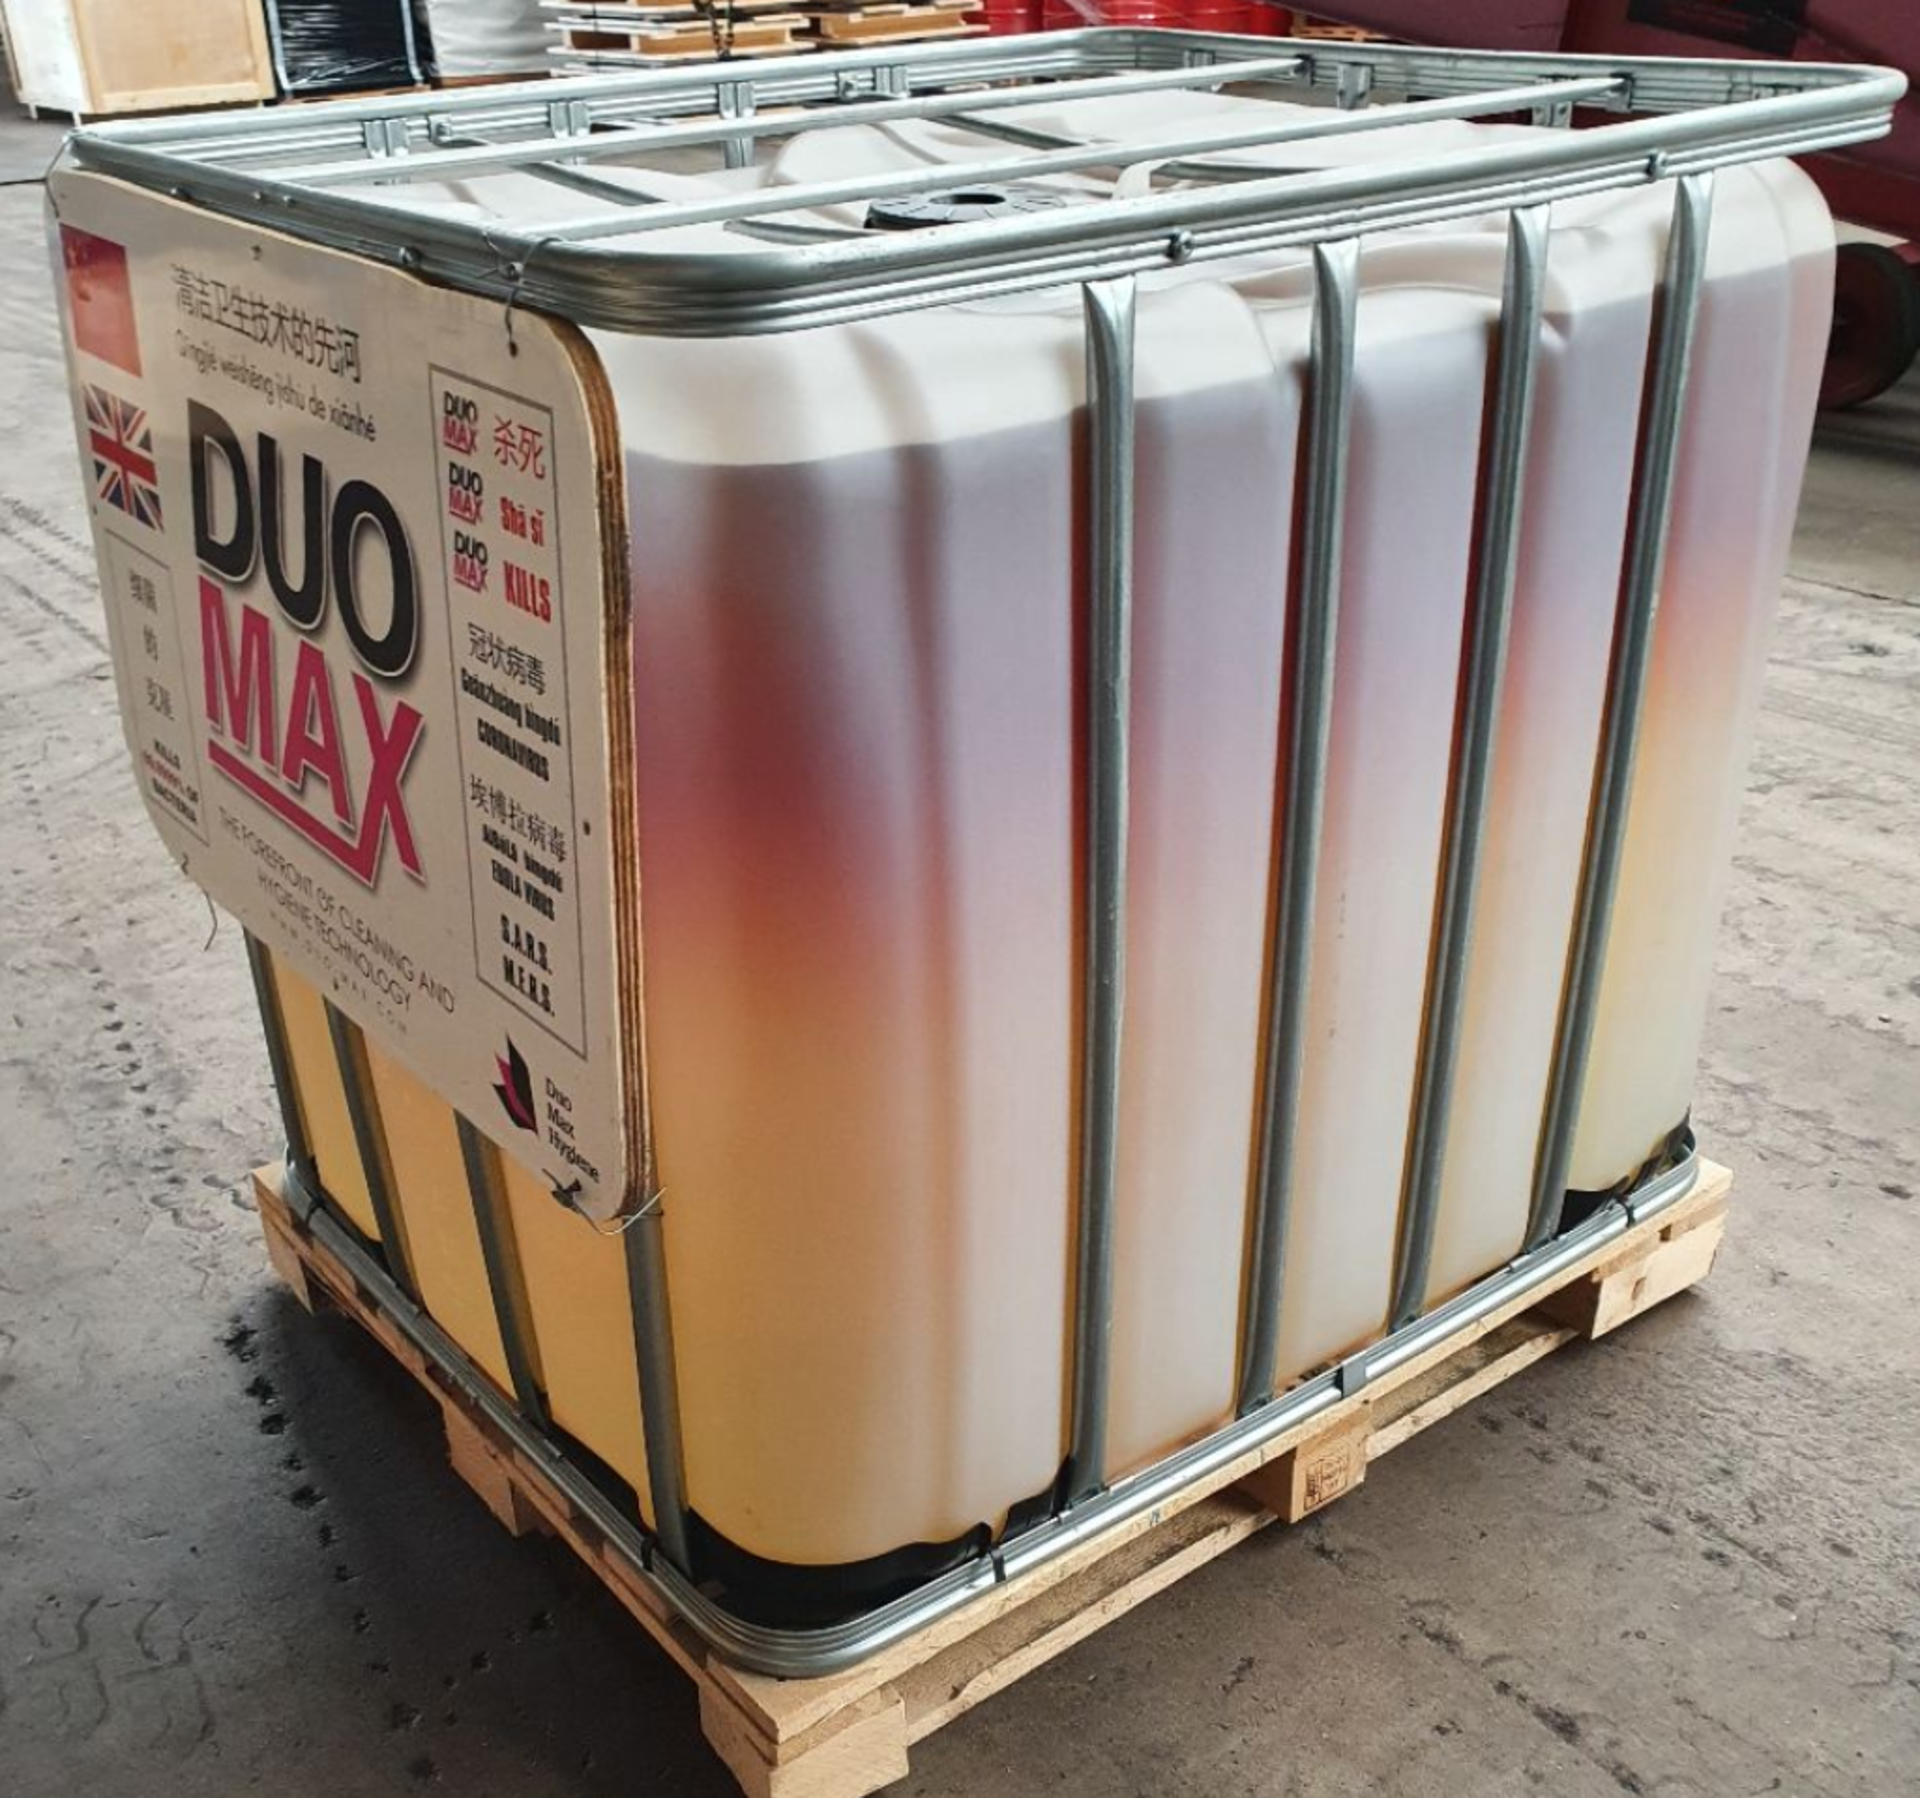 1000L IBC OF DUOMAX SUPER CONCENTRATED DISINFECTANT, MADE IN UK, MARCH 2020, ALL DOCUMENTS ATTACHED - Image 2 of 75